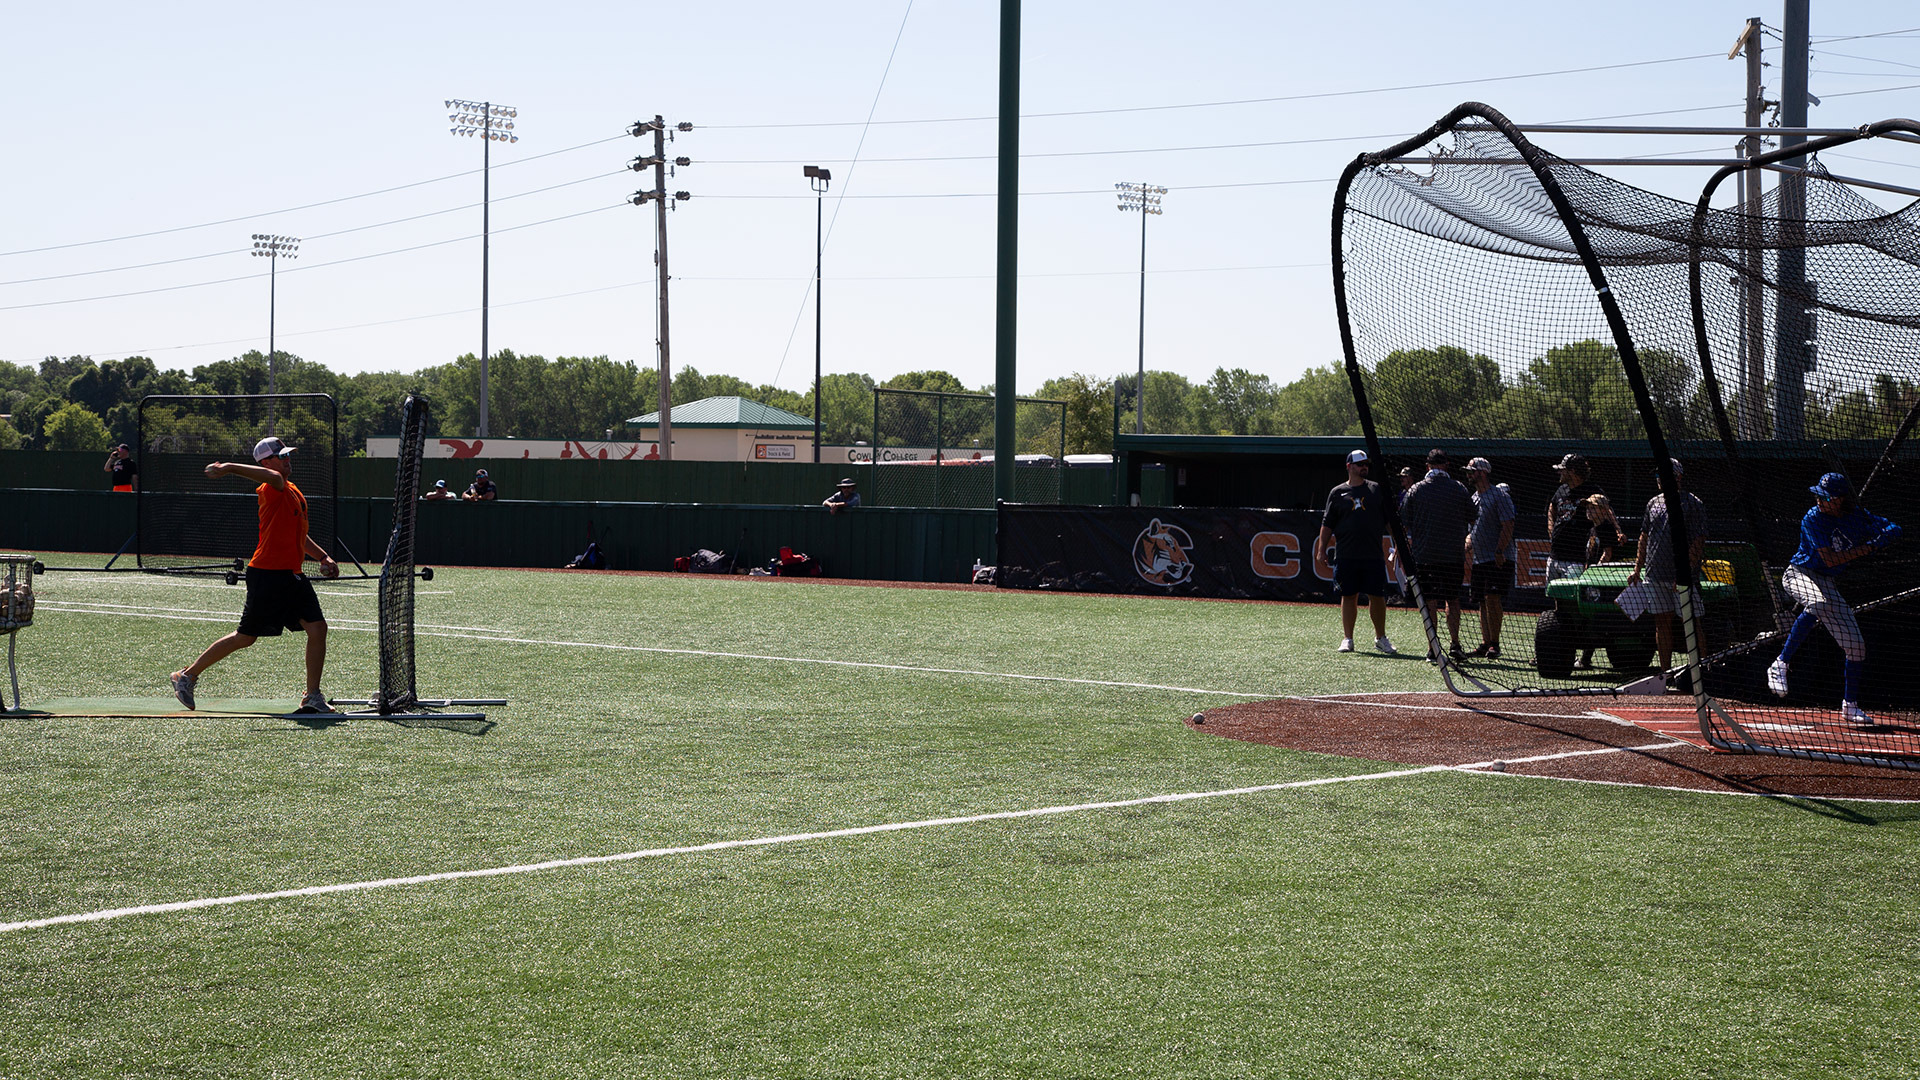 Large turnout for Cowley College High School Baseball Showcase